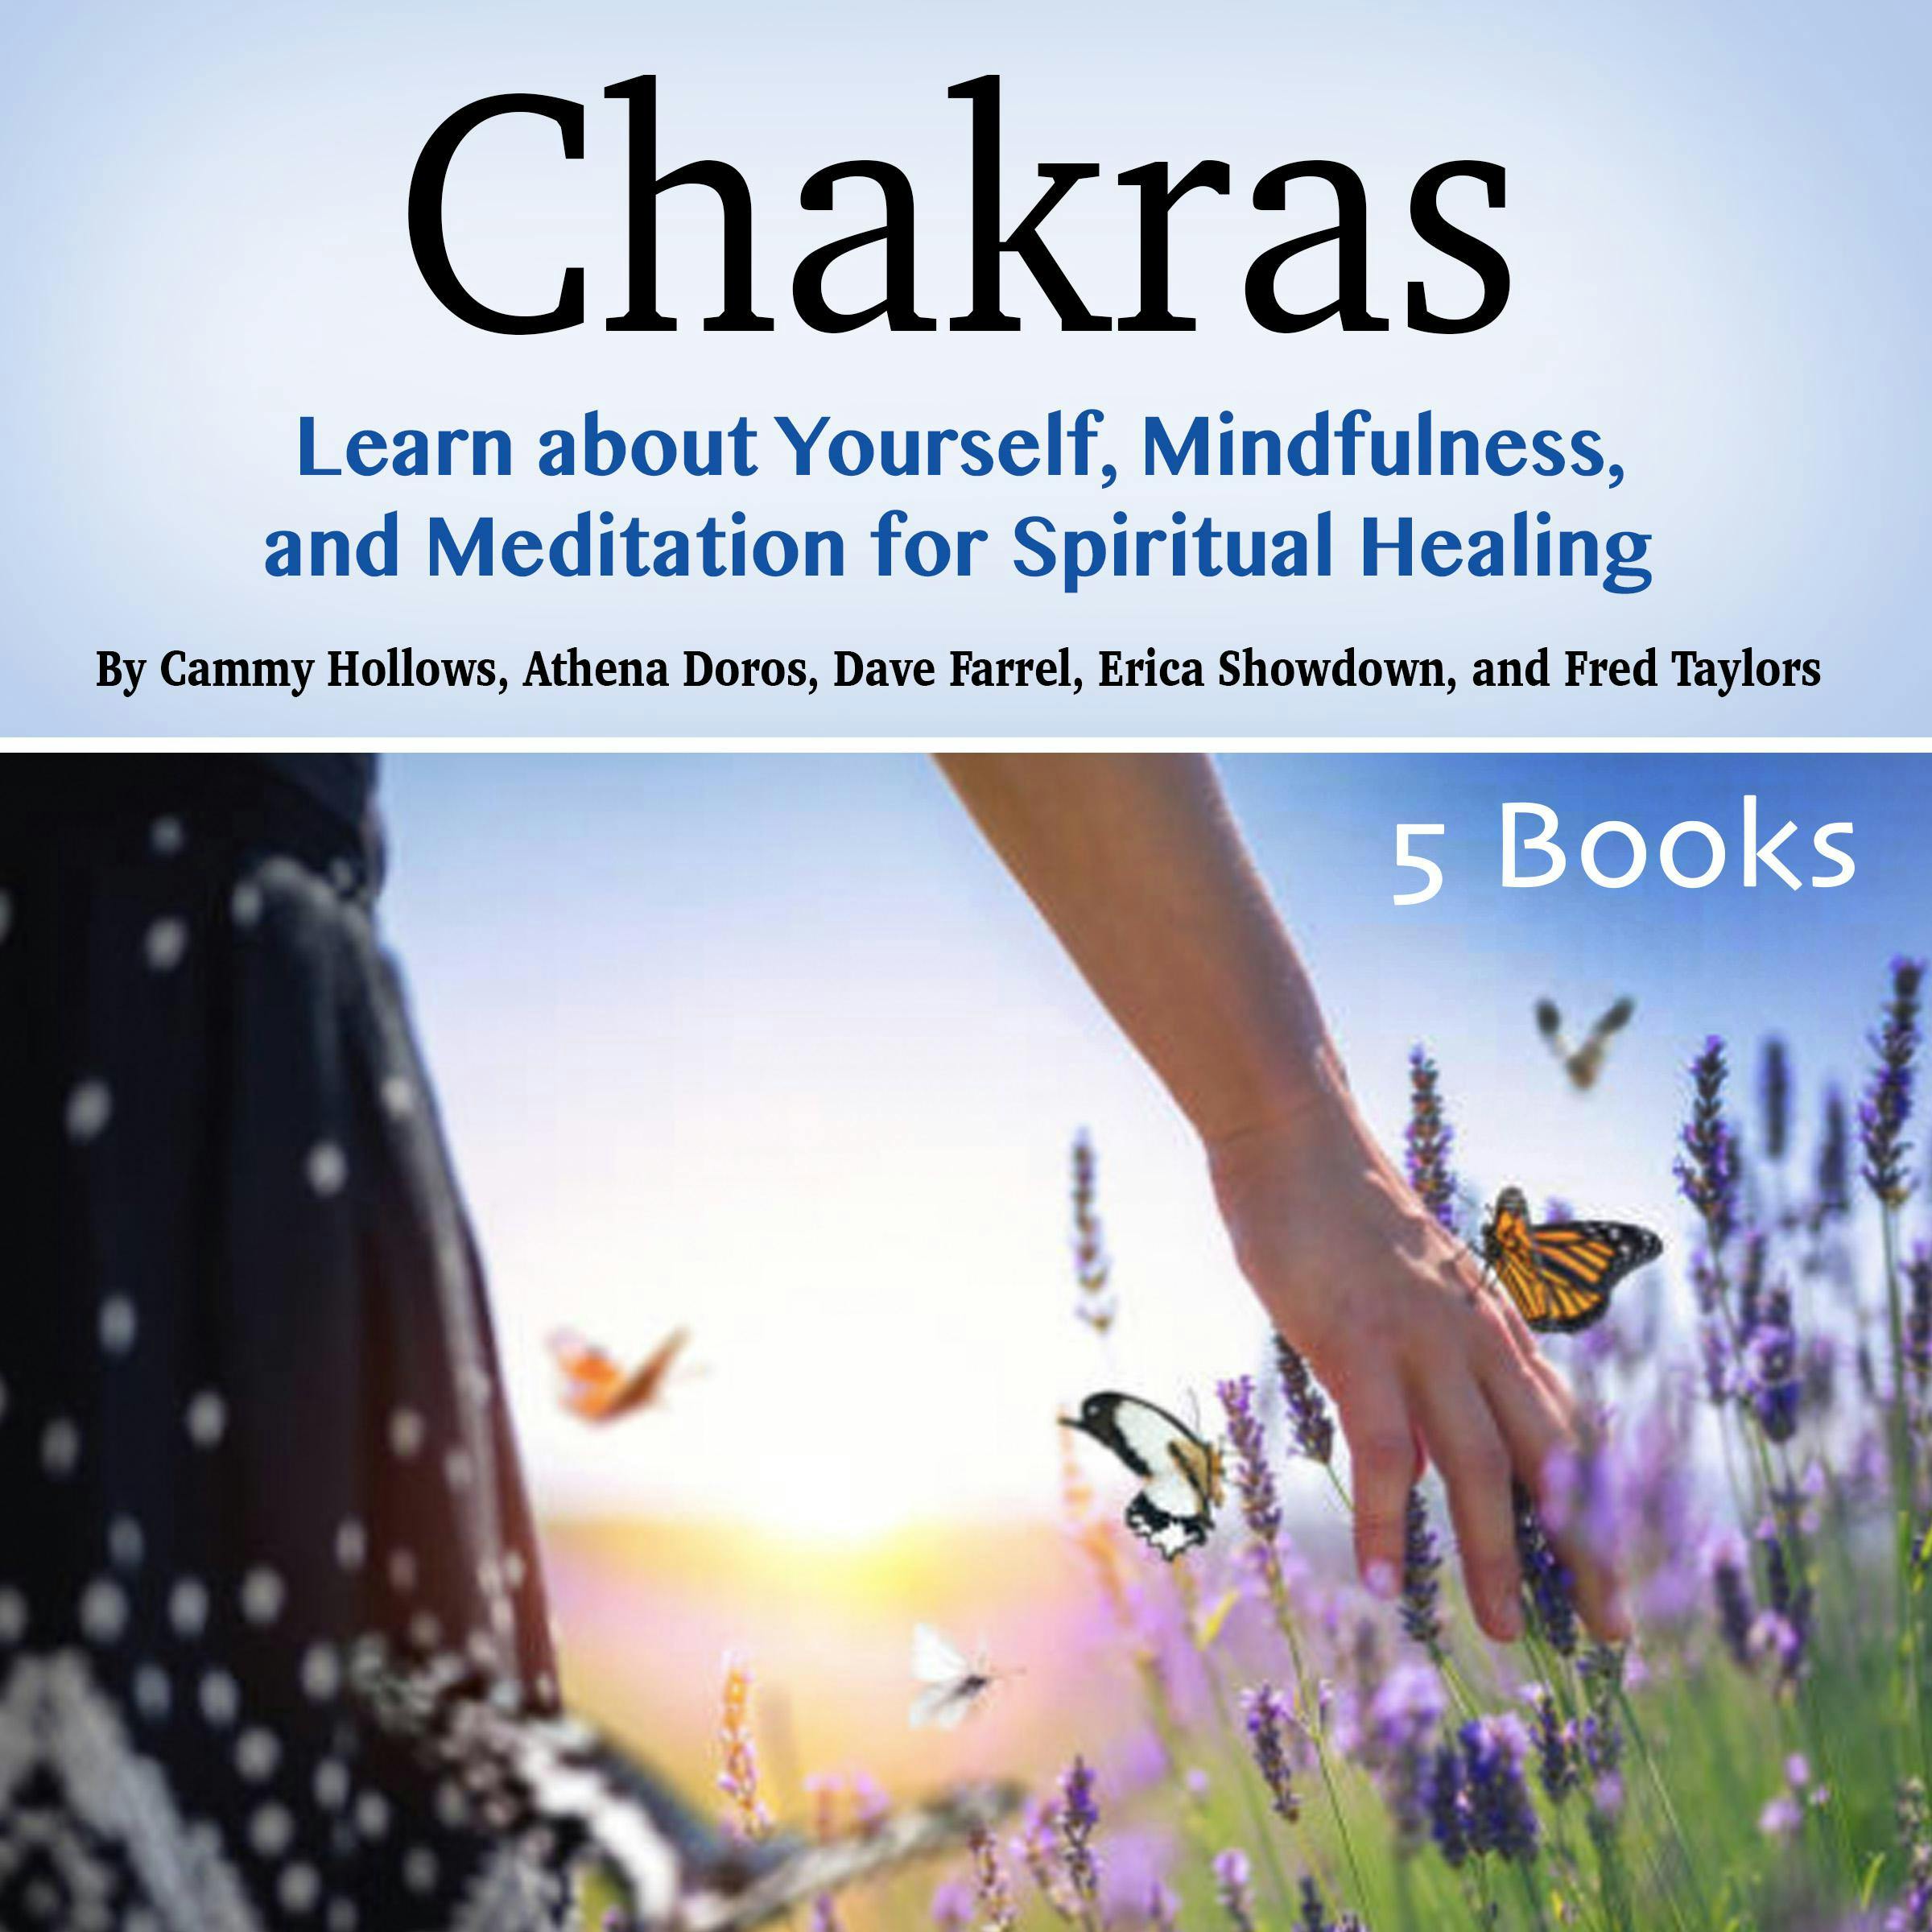 Chakras: Learn about Yourself, Mindfulness, and Meditation for Spiritual Healing - Athena Doros, Cammy Hollows, Fred Taylors, Erica Showdown, Dave Farrel